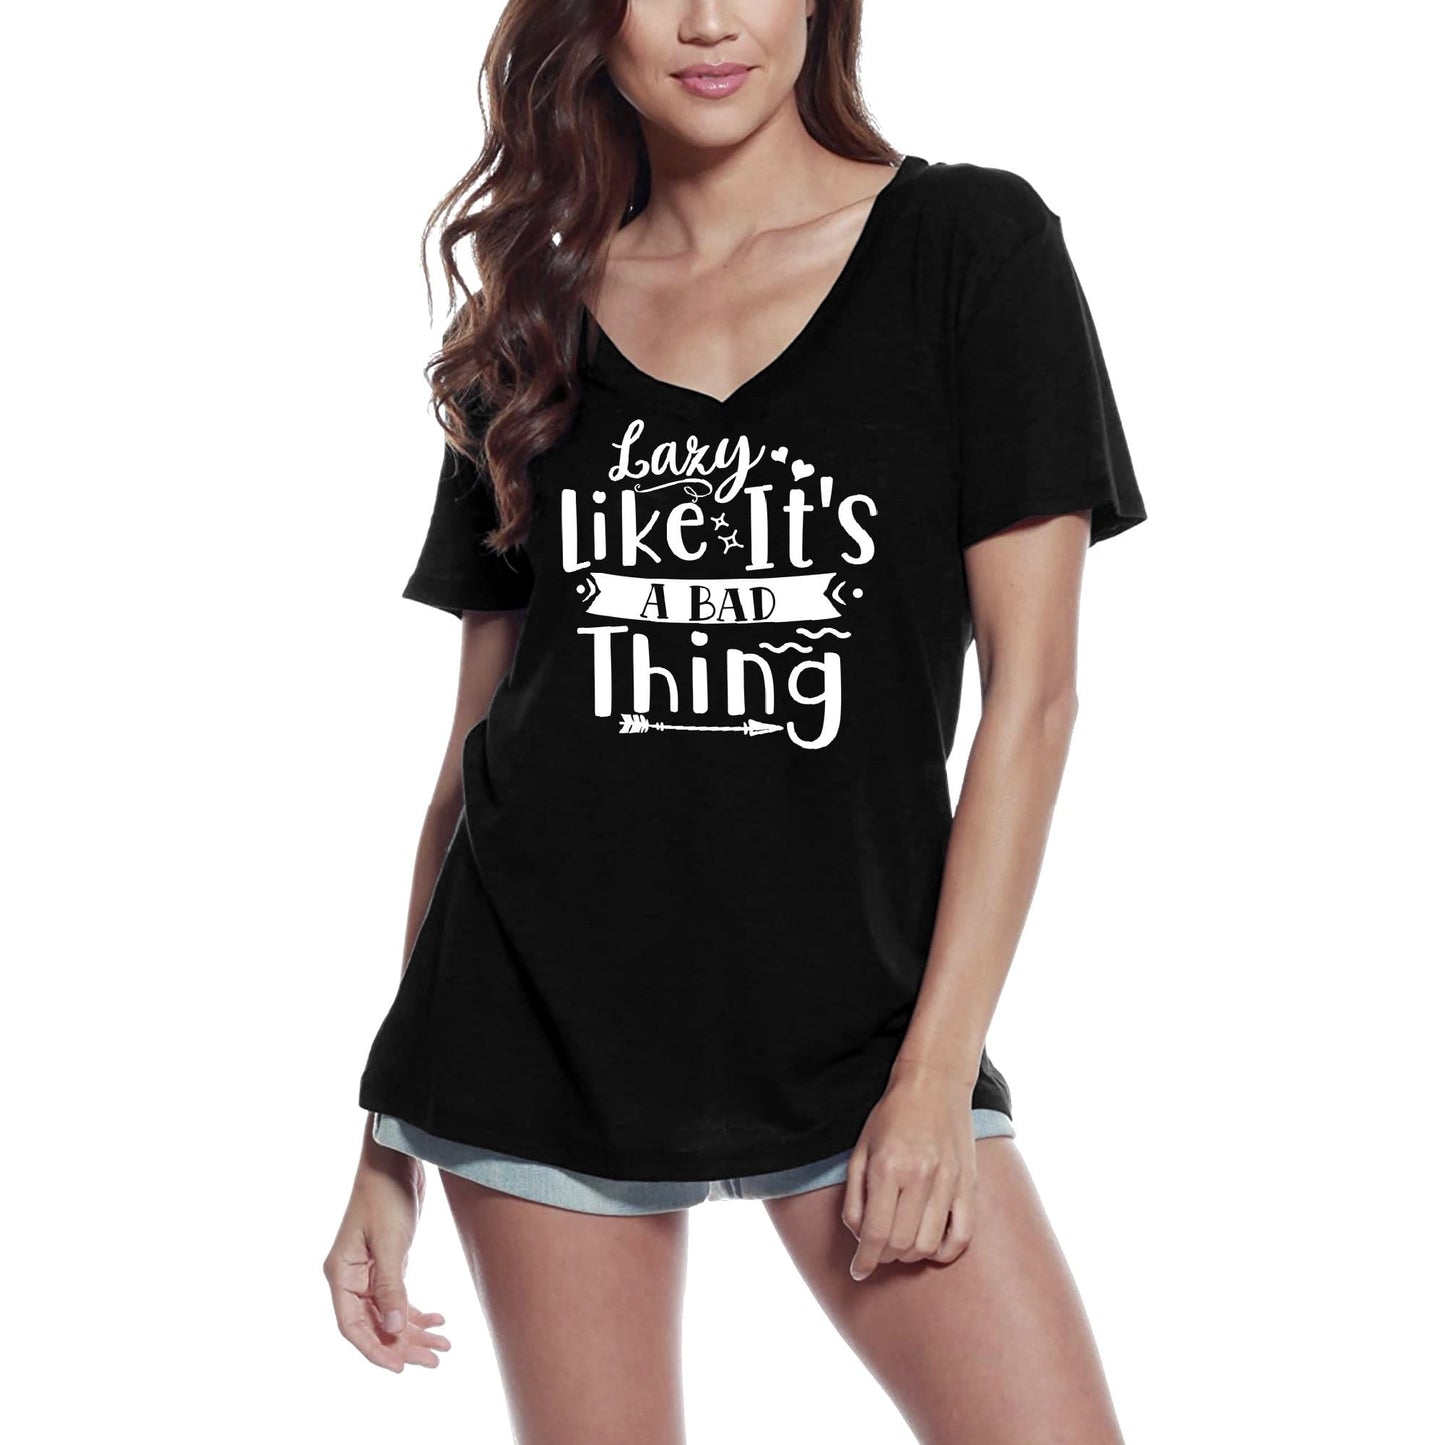 ULTRABASIC Women's T-Shirt Lazy Like It's a Bad Thing - Funny Vintage Tee Shirt